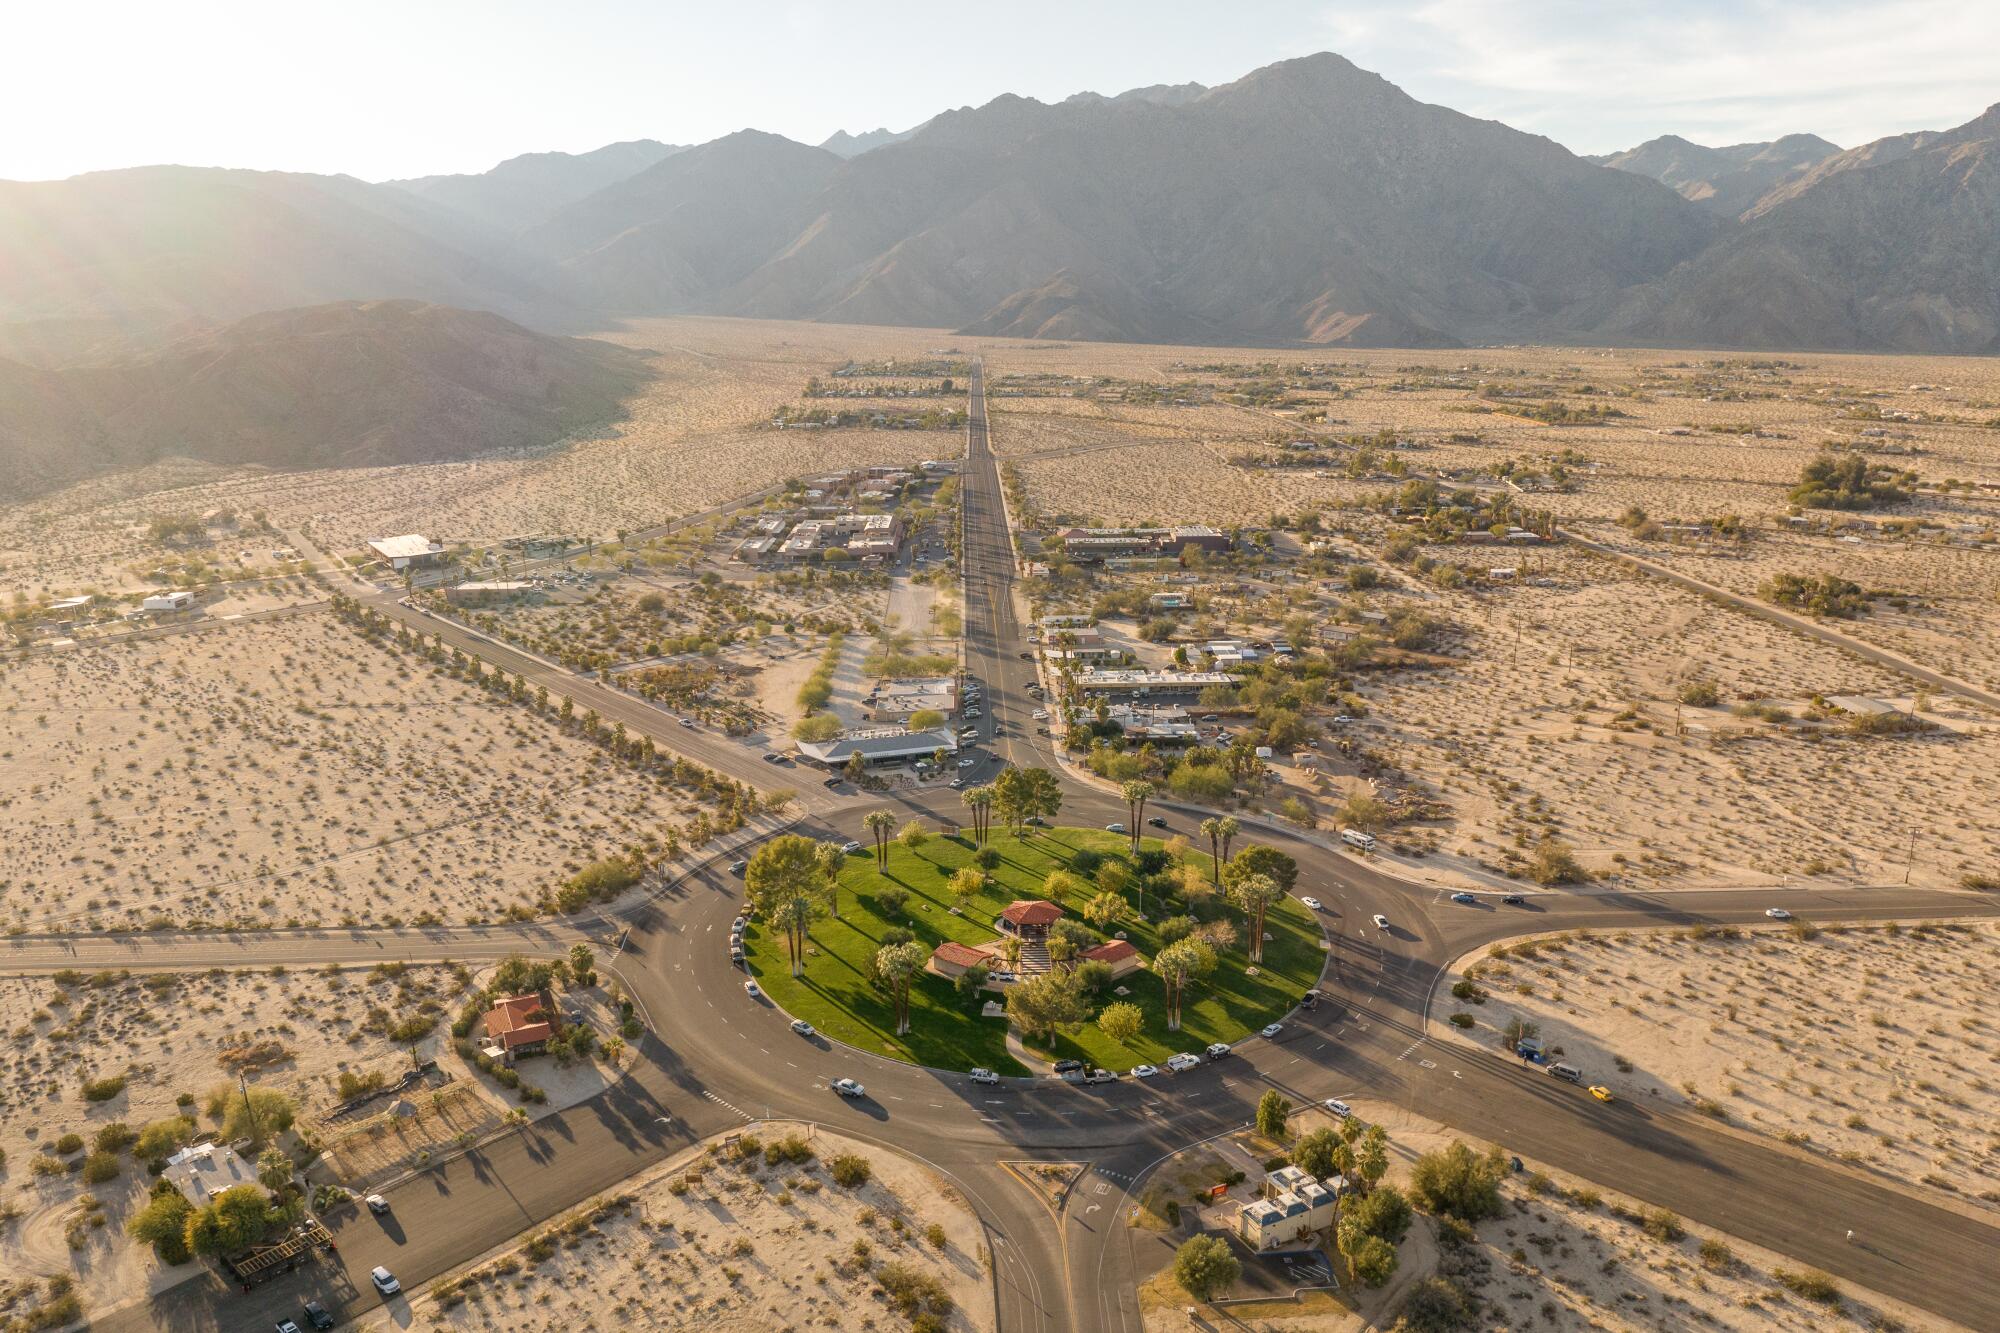 The Christmas Circle Community Park in Borrego Springs, seen from above.